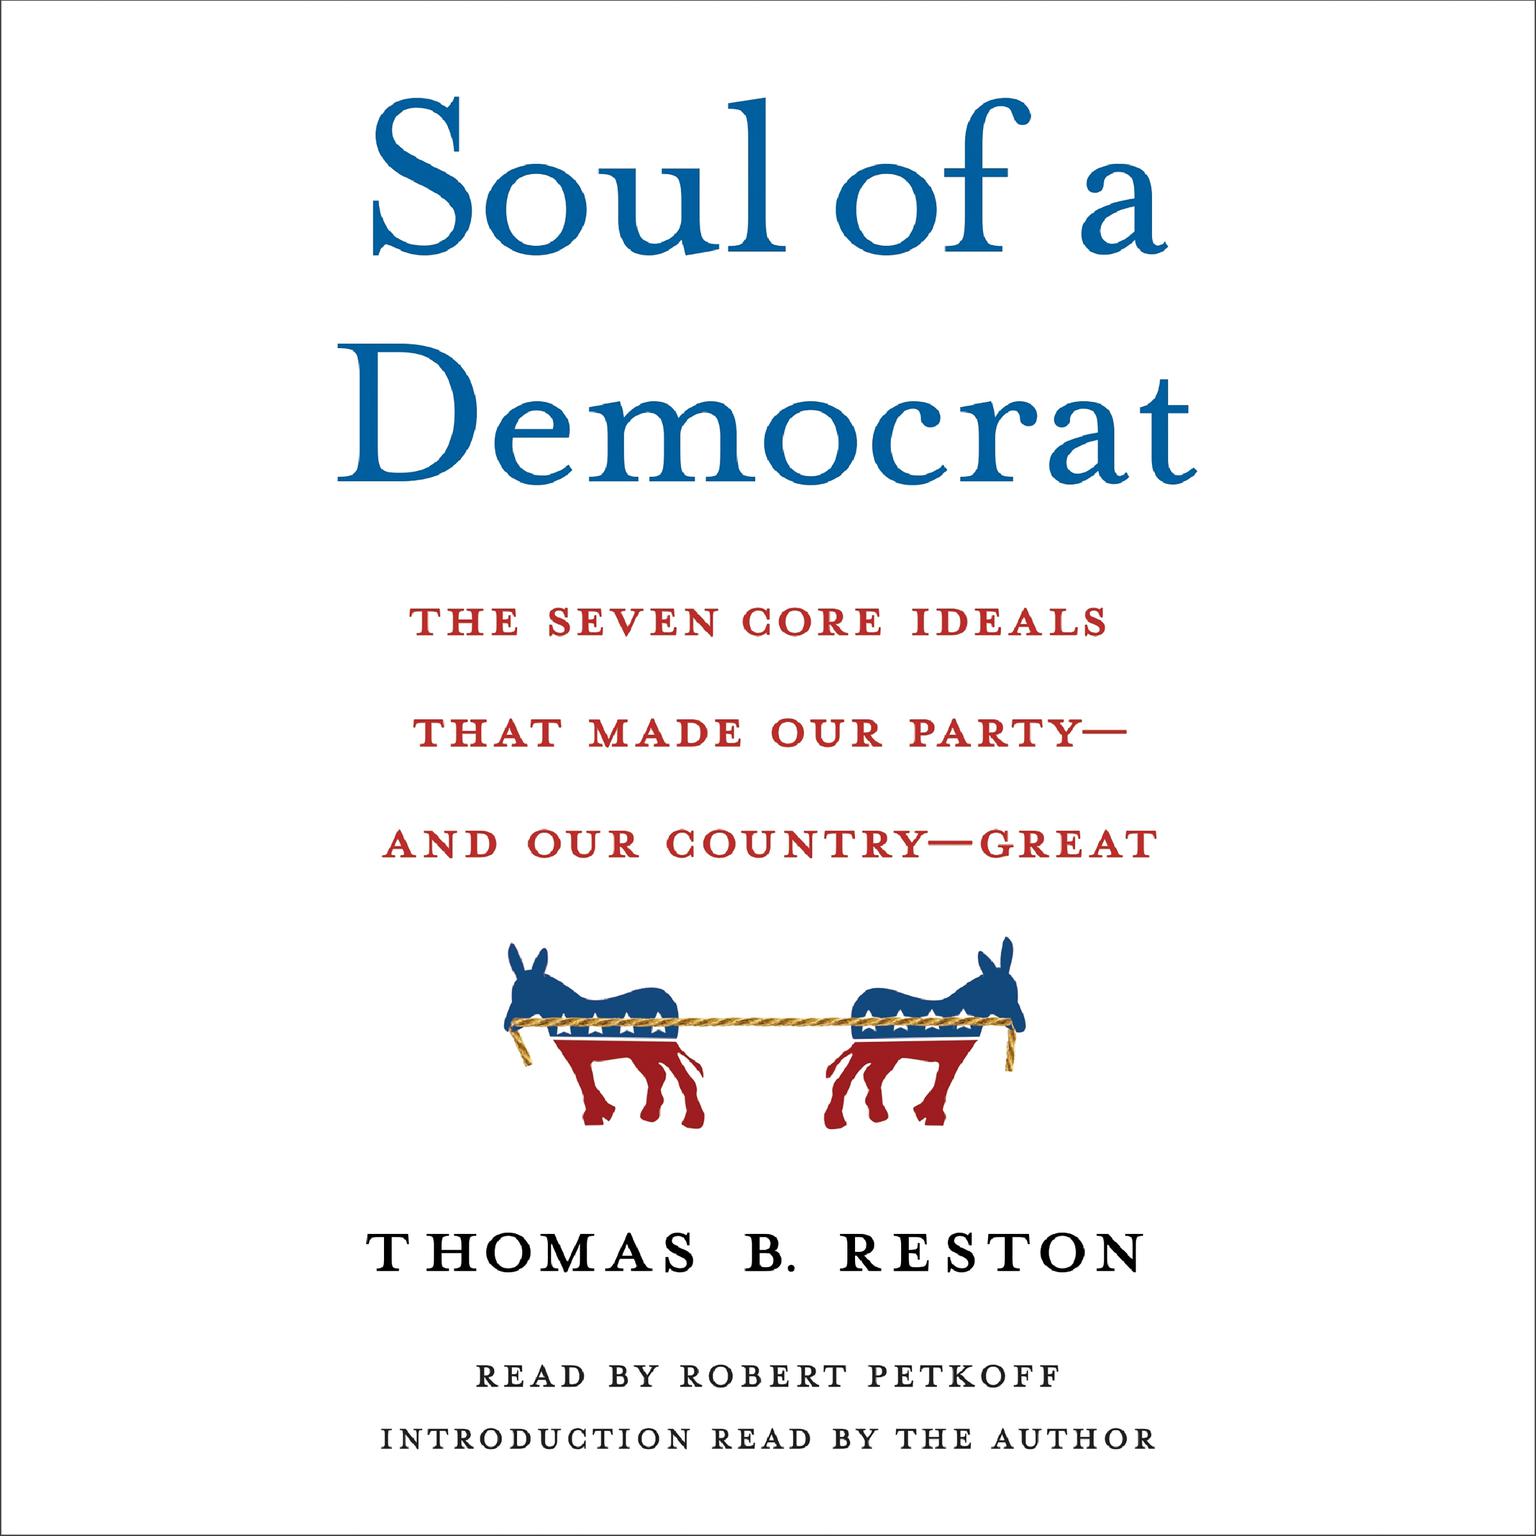 Soul of a Democrat: The Seven Core Ideals That Made Our Party - And Our Country - Great Audiobook, by Thomas B. Reston